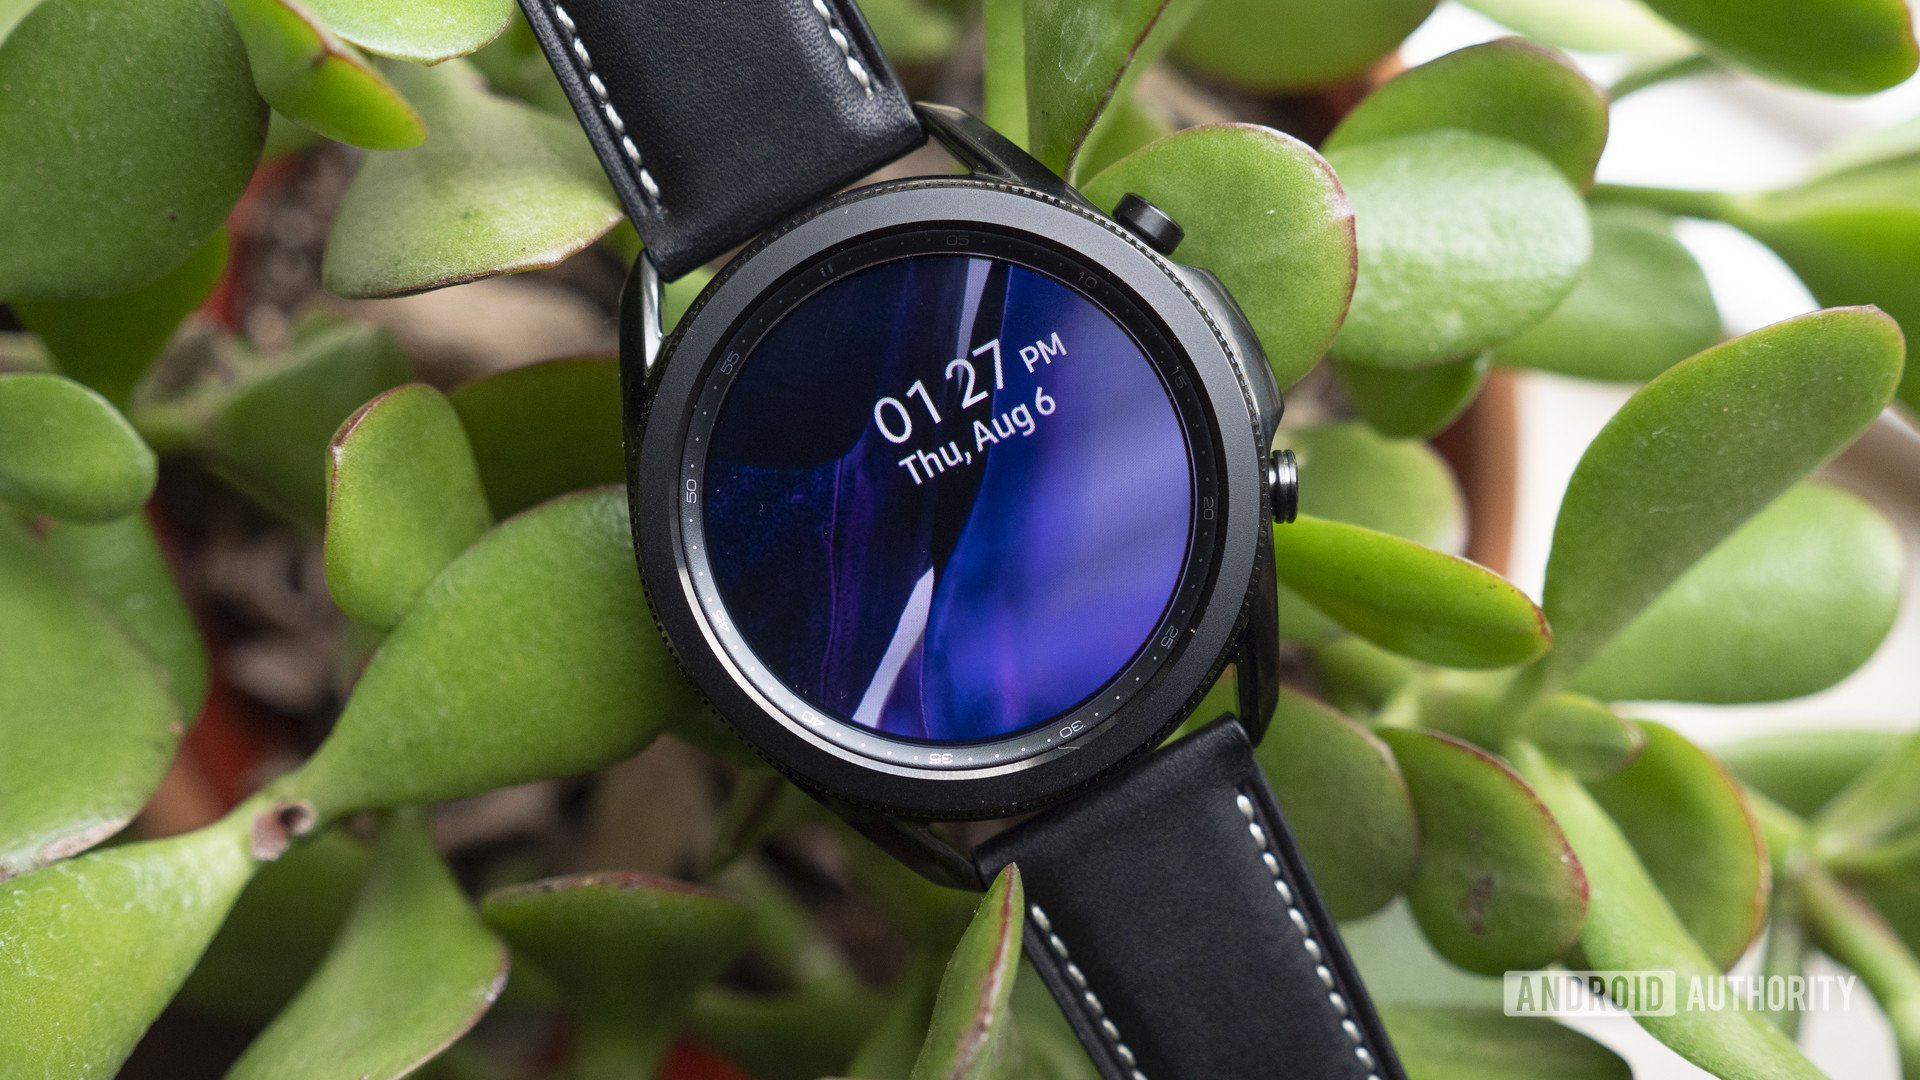 More Samsung Galaxy Watch 4 details revealed in FCC listings (Update)